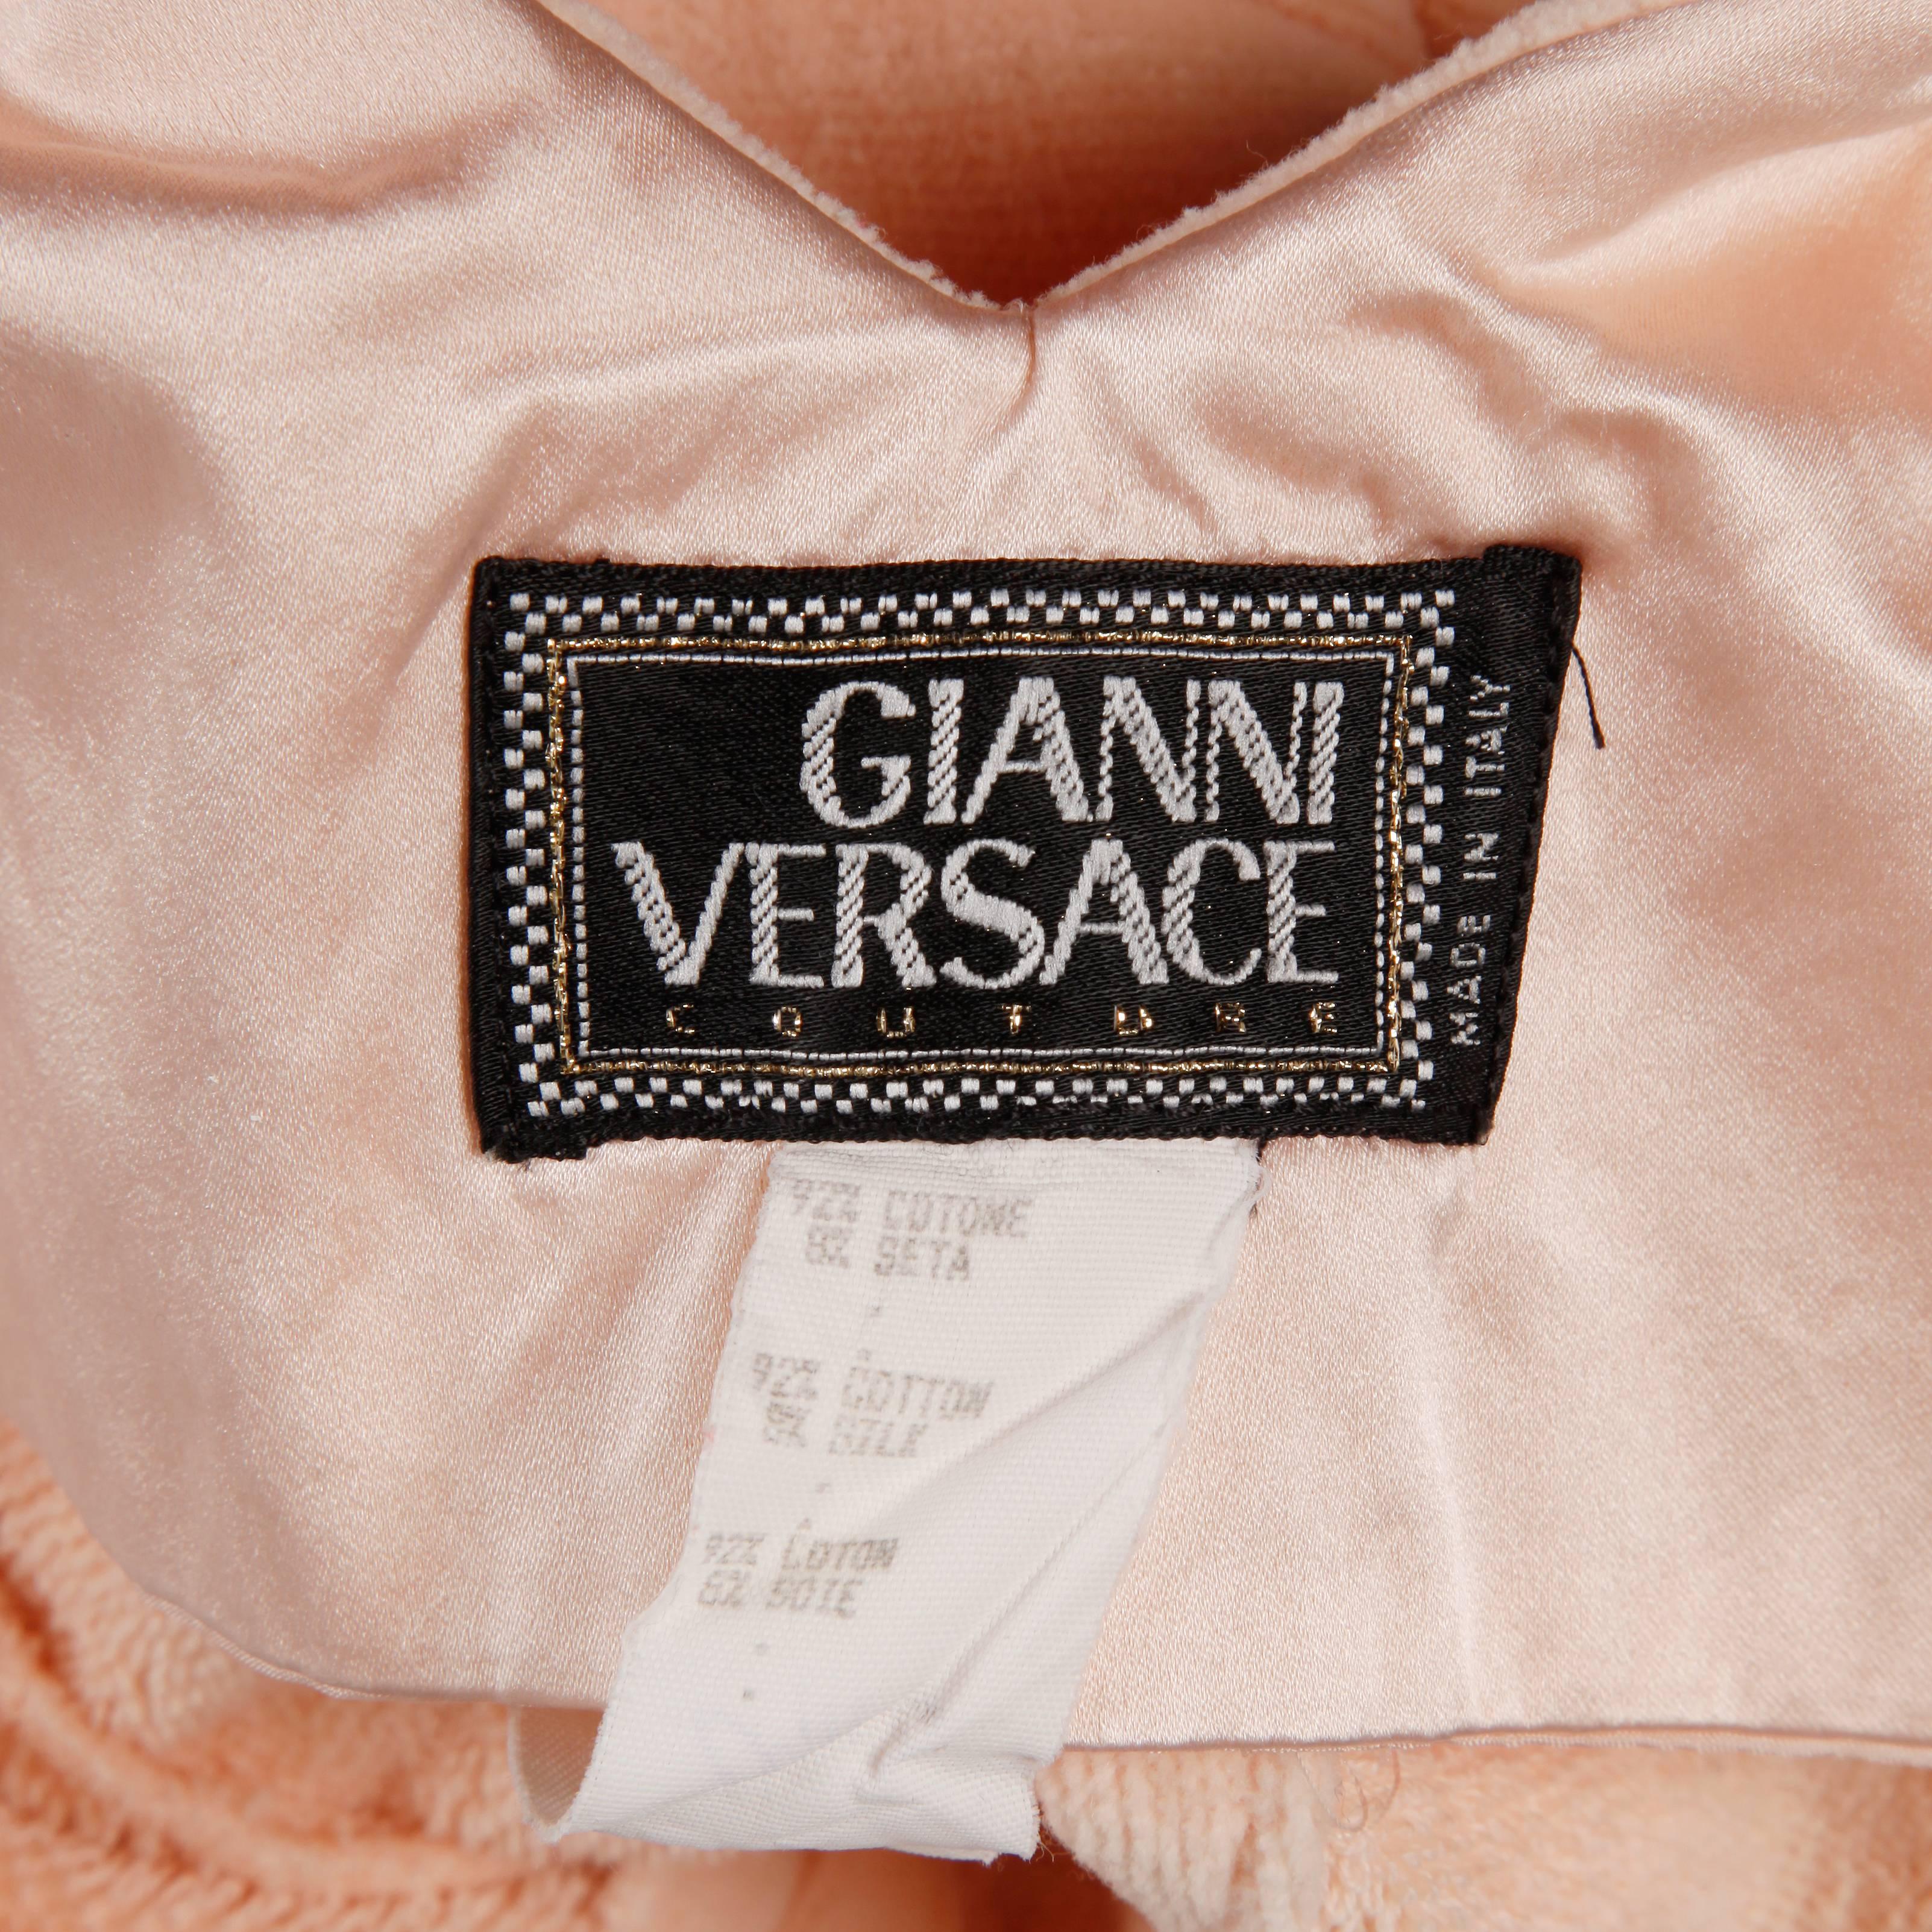 Super soft pale pink body con dress in a velvety chenille by Gianni Versace Couture. The cut on this is so flattering! Simple, elegant and chic.

Details: 

Fully Lined
Size Zip and Hook Closure
Marked Size: 6
Estimated Size: Small
Color: